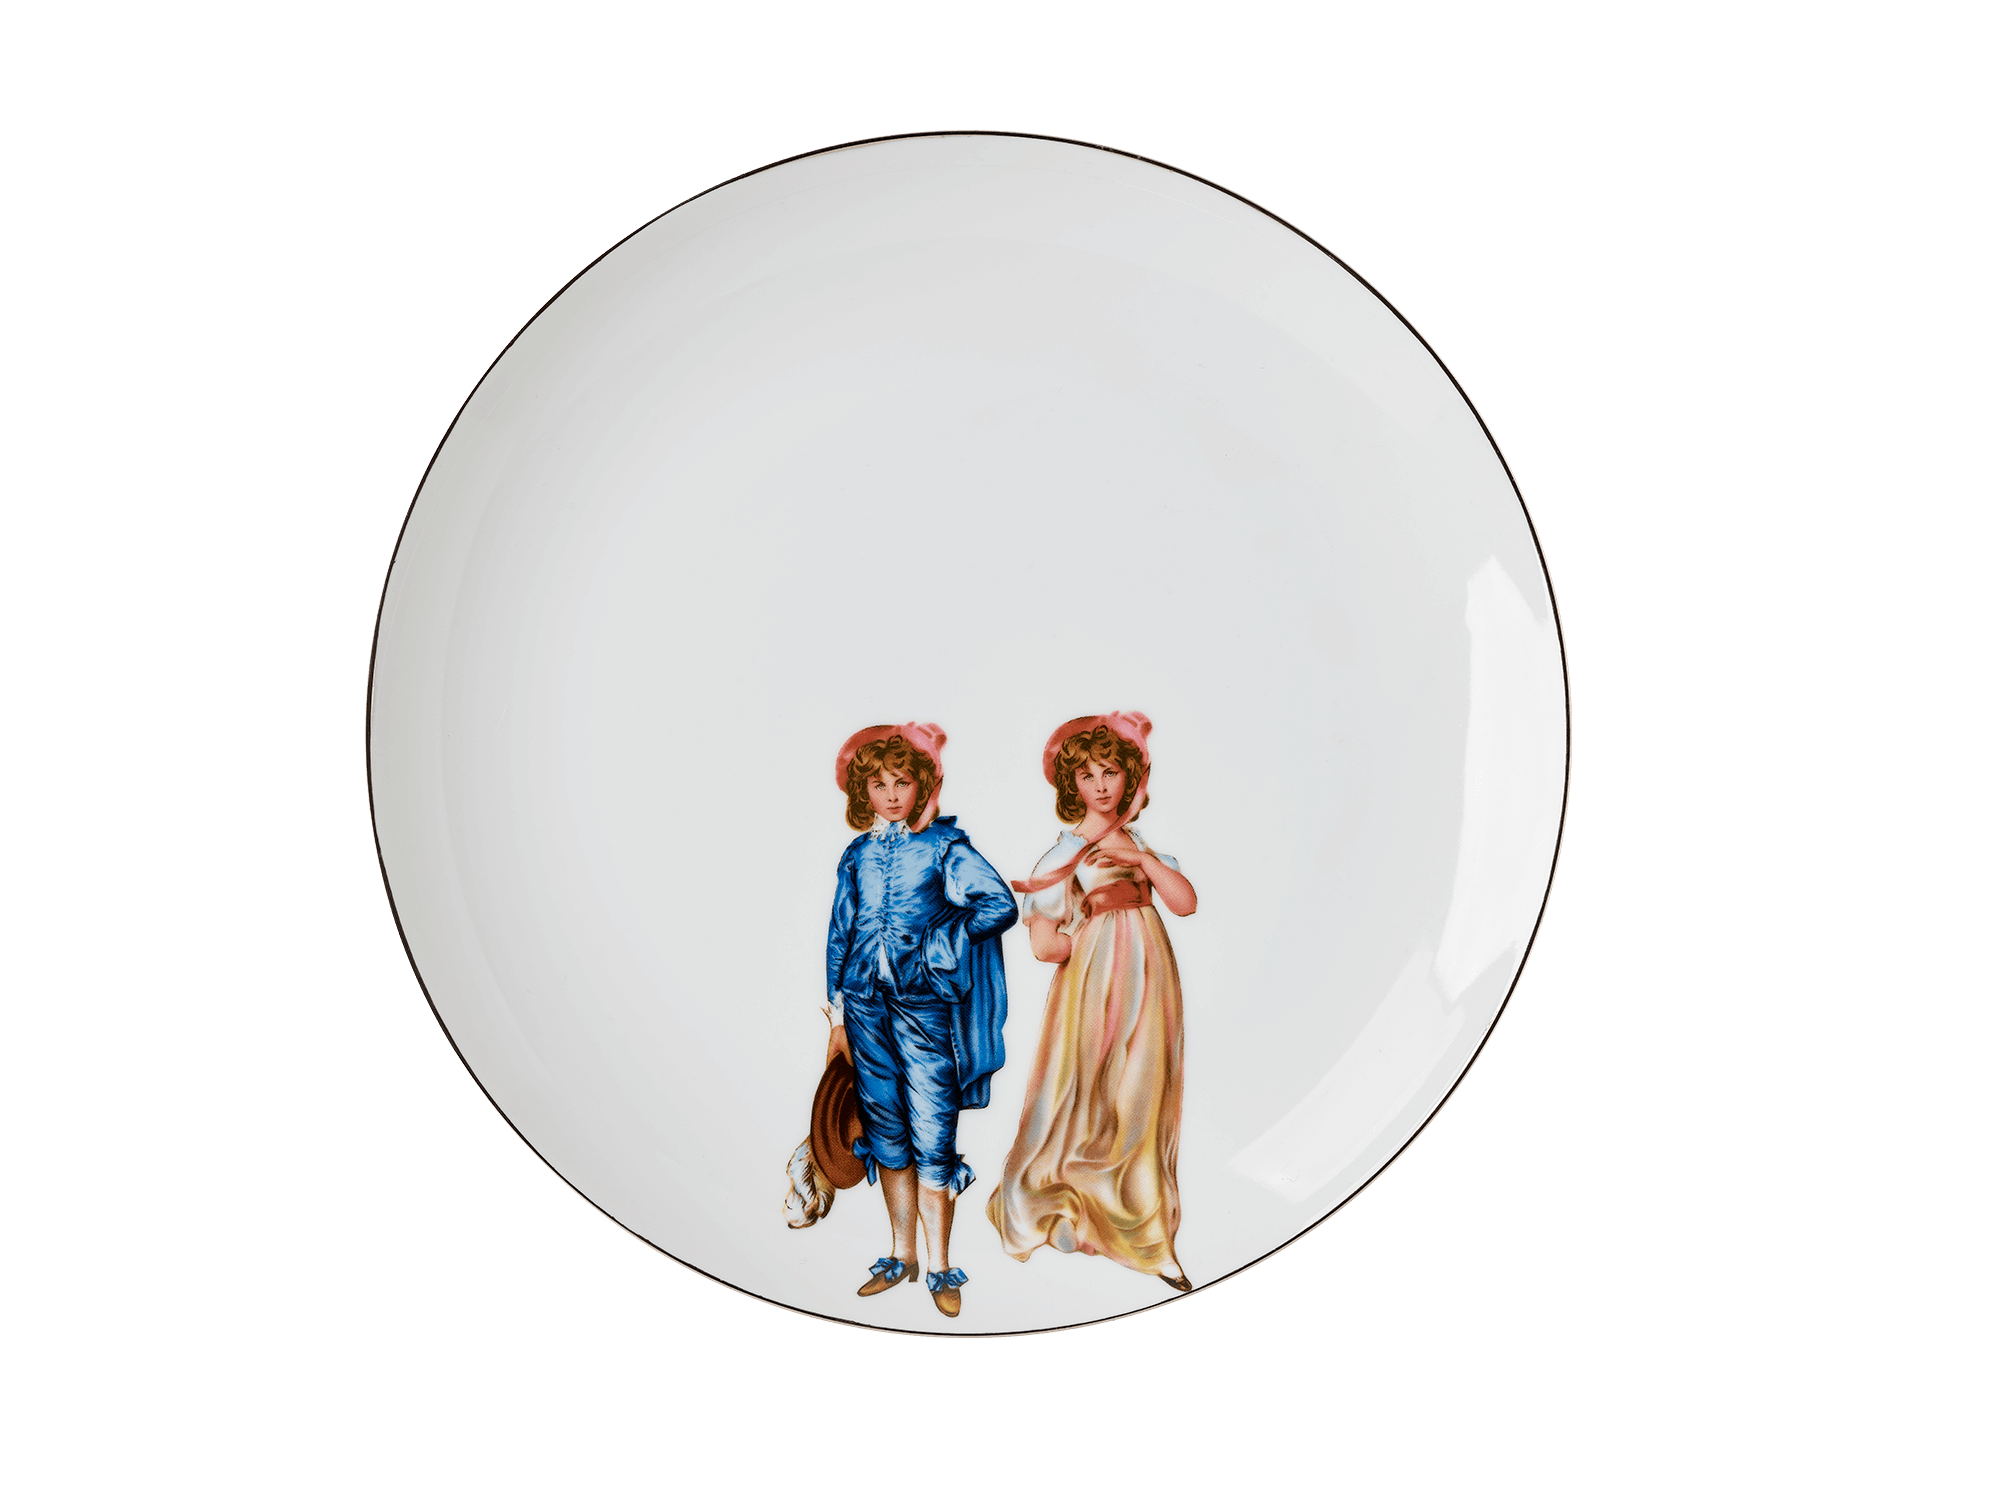 /A%20white%20ceramic%20plate%20with%20an%20illustration%20of%20Victorian-style%20twins%20